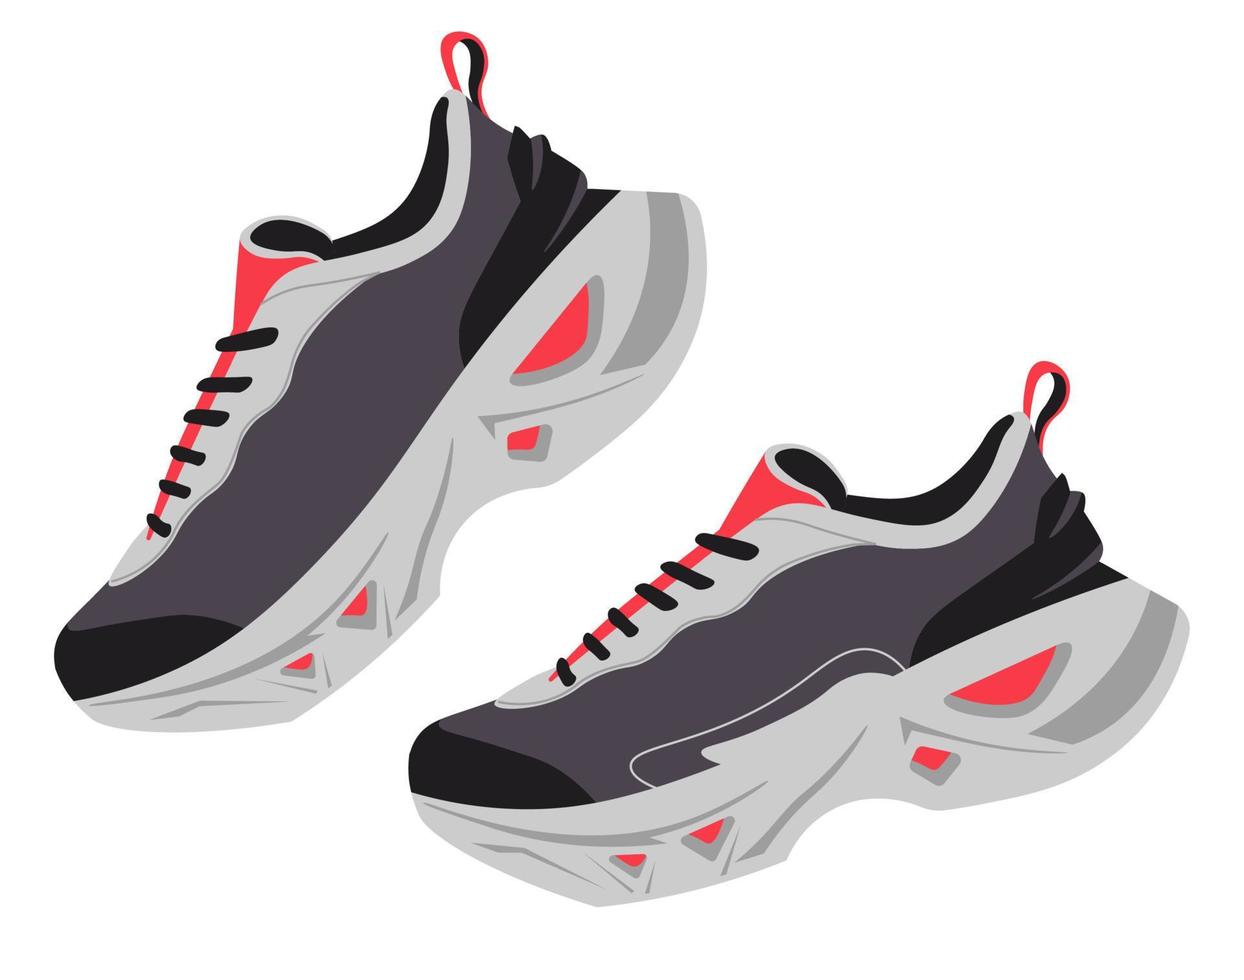 Sneakers with shoelaces, simple pair of shoes vector